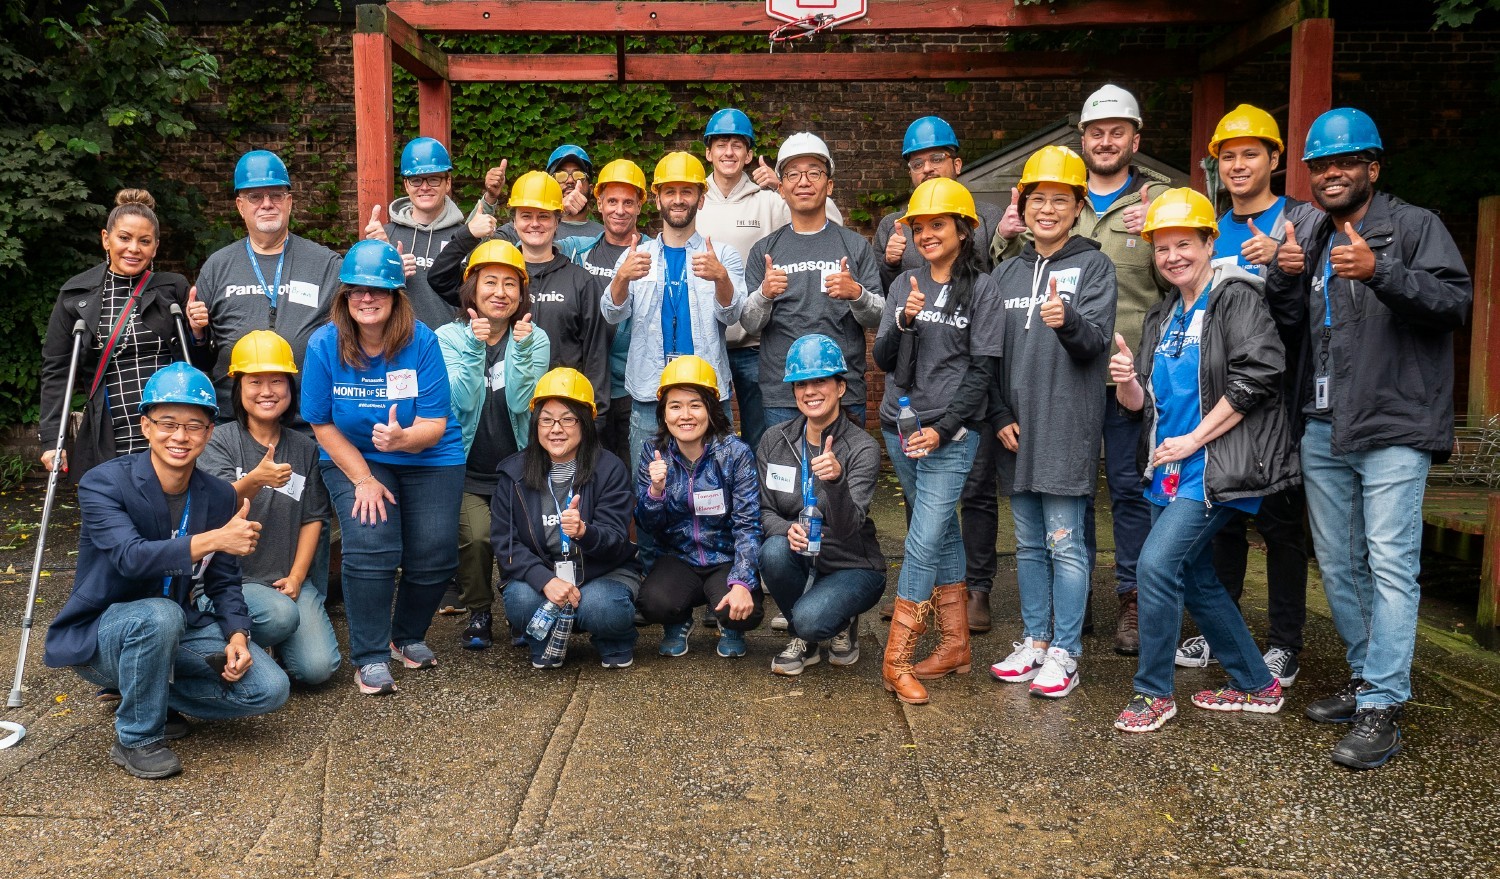 Panasonic employees at a volunteer event